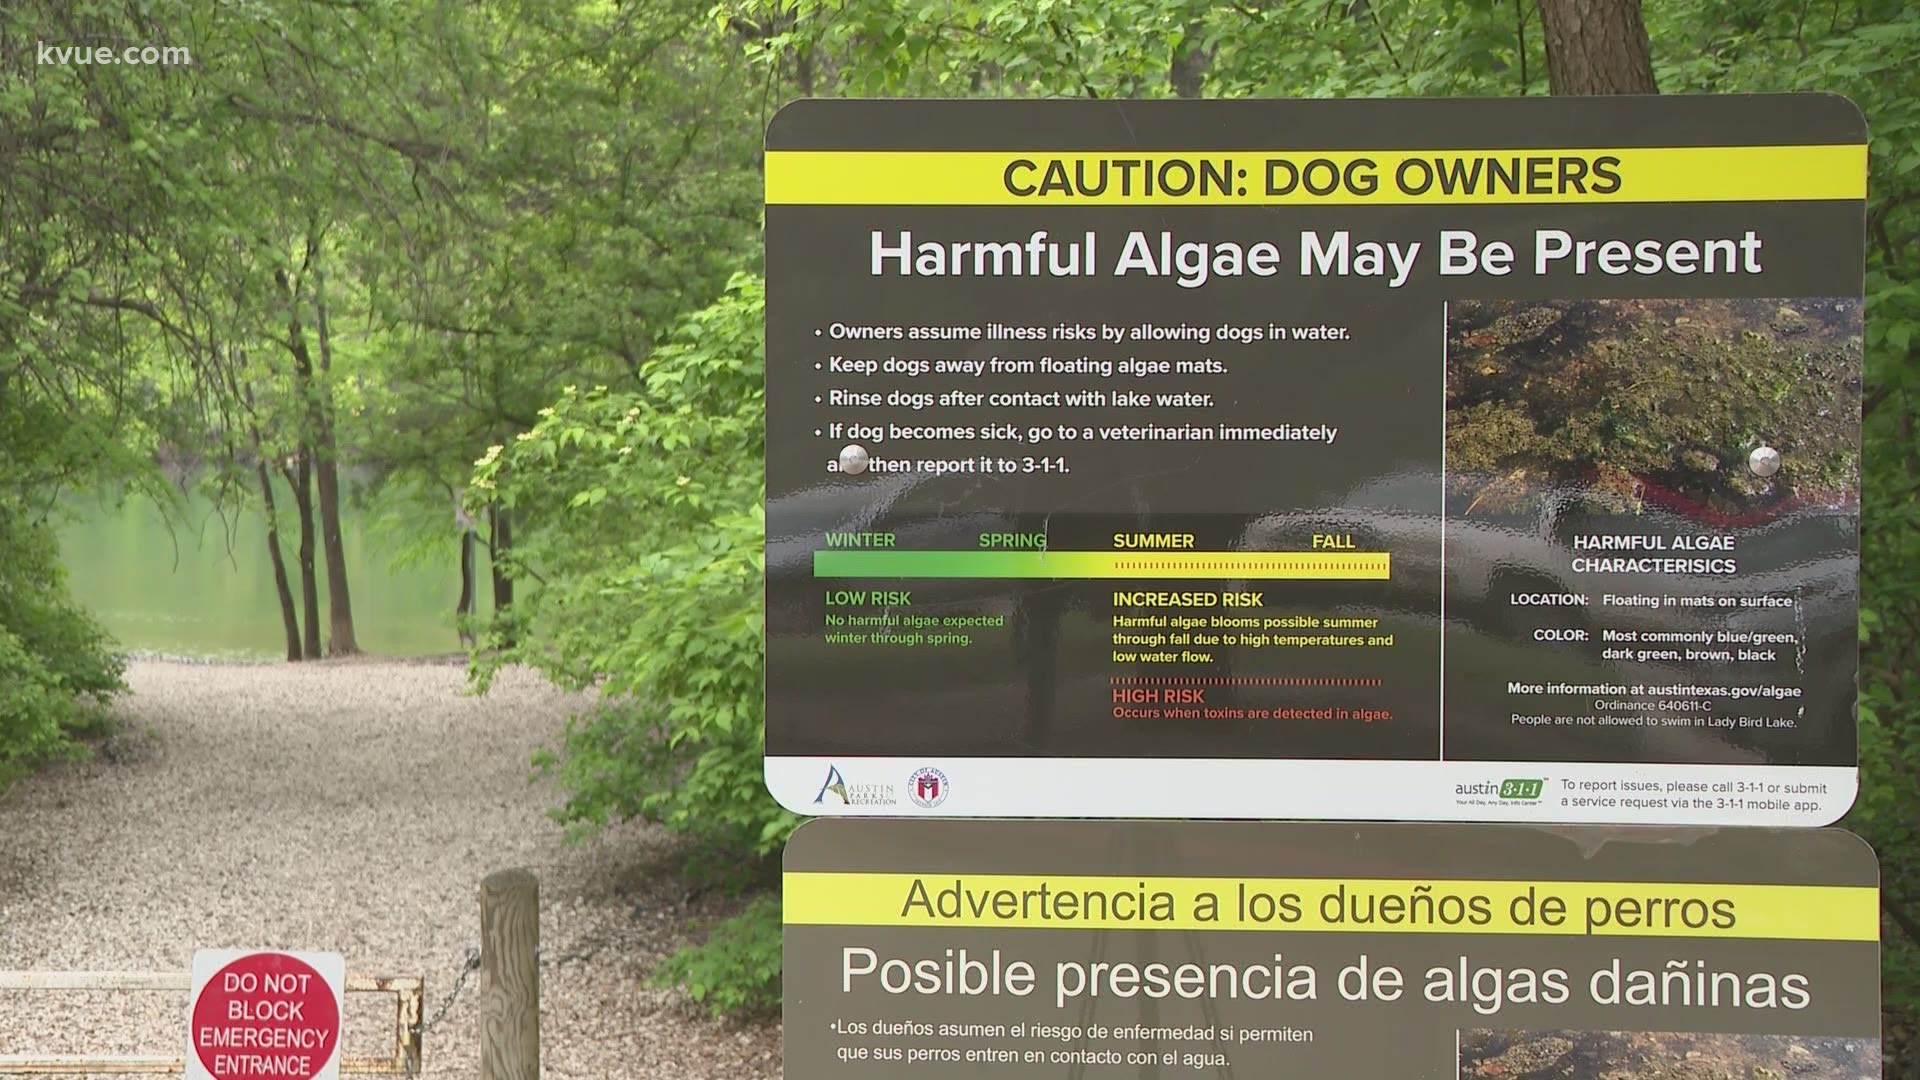 Toxic algae have been detected in local waterways – earlier than it has been in the past. The KVUE Defenders discovered booming growth may be part of the problem.